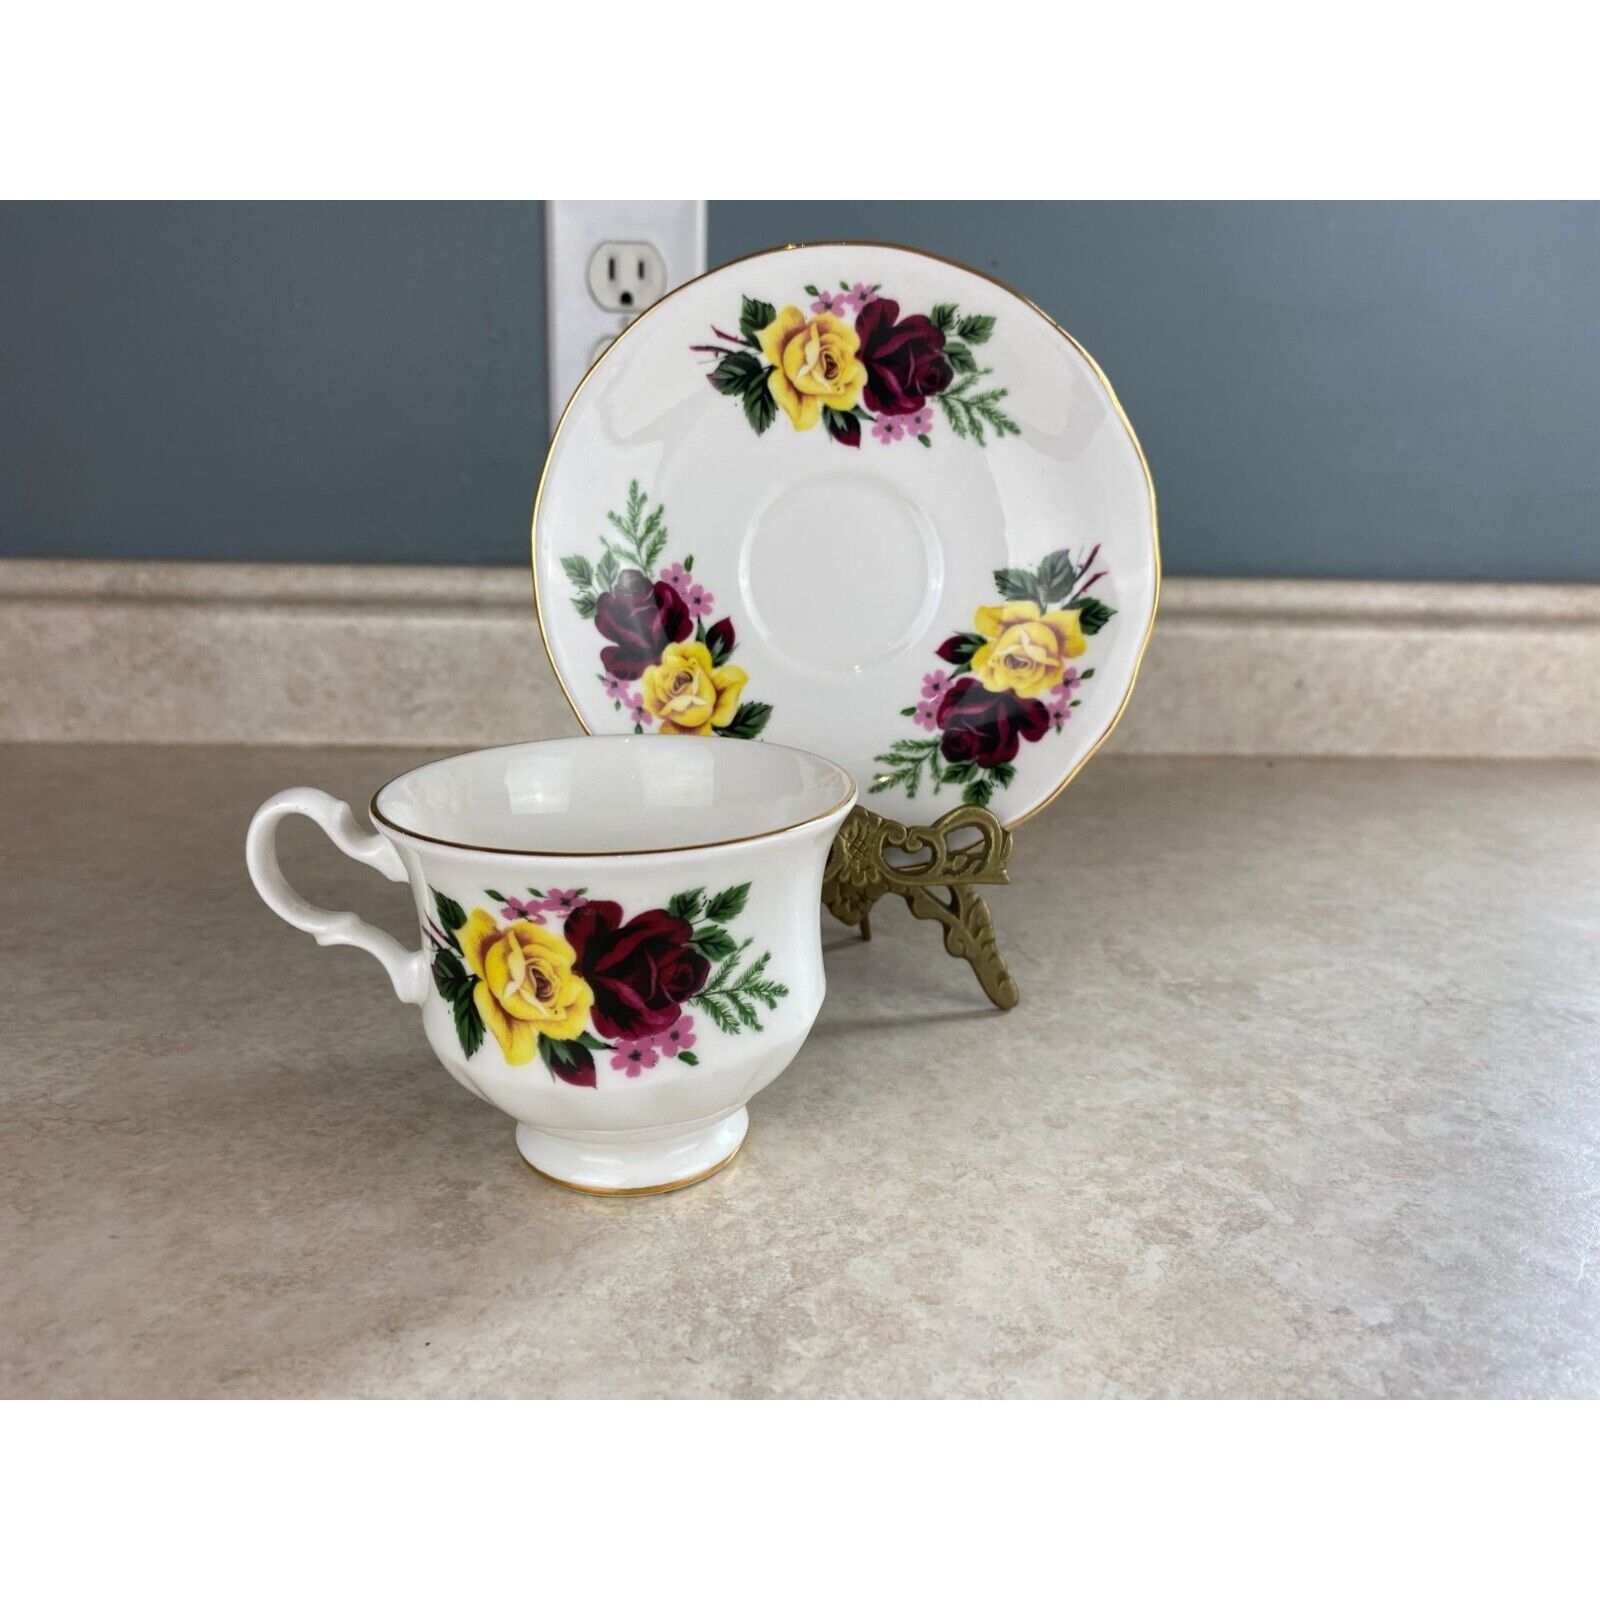 Primary image for Queen Anne Full Bloom Red And Yellow Roses Tea Cup And Saucer Set